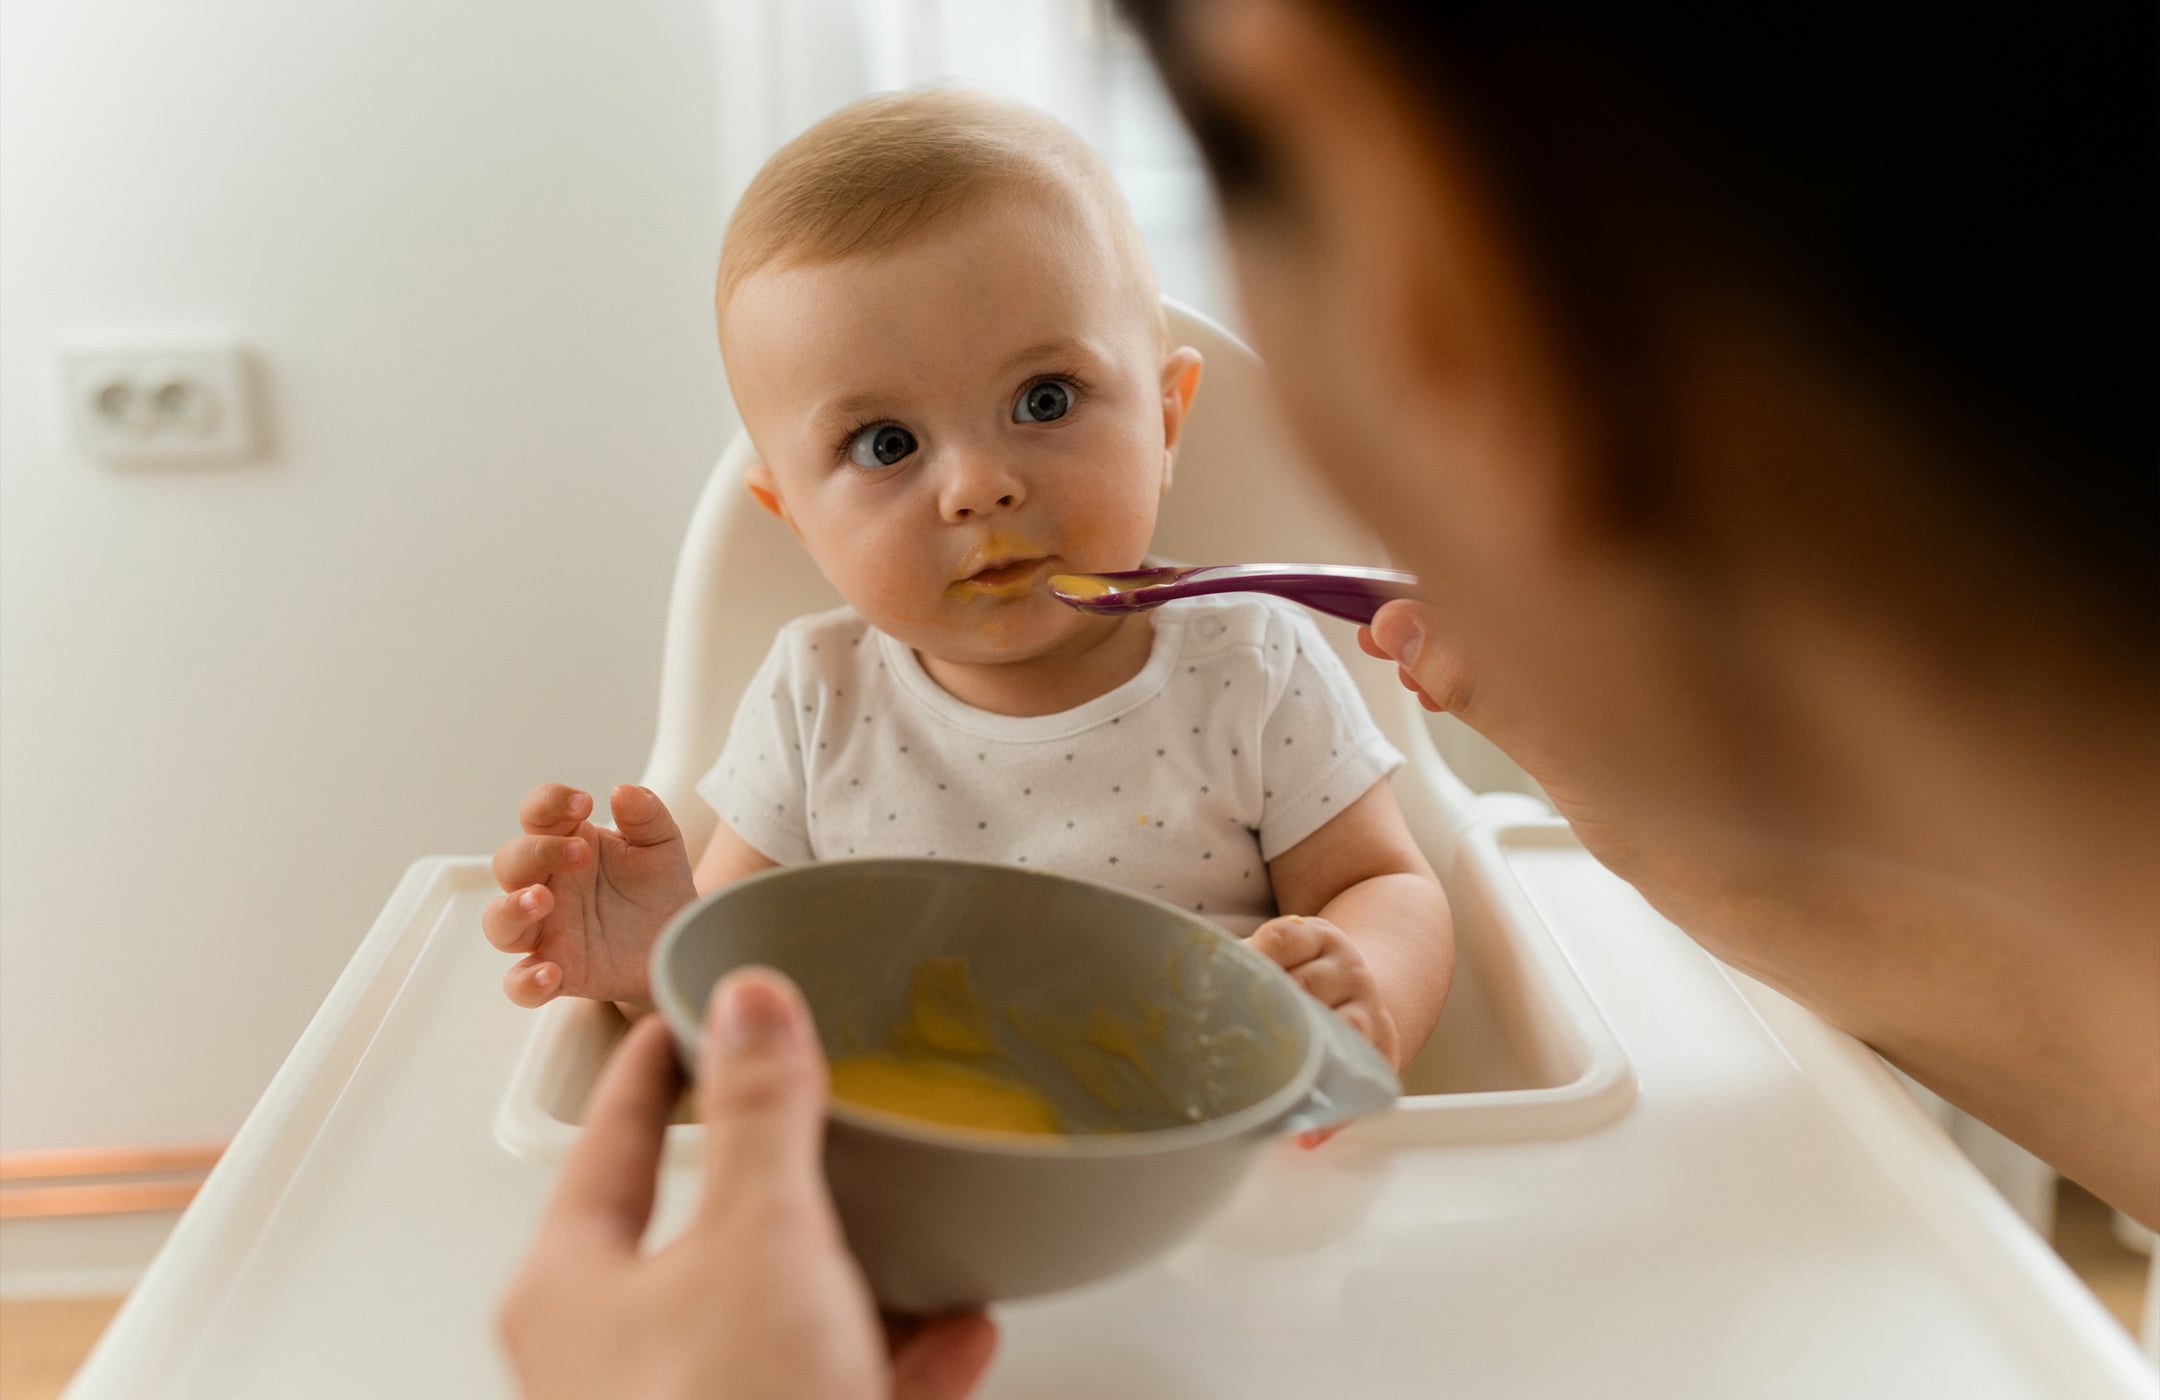 Starting Solids Checklist: Everything You’ll Need, From High Chair to Dishware